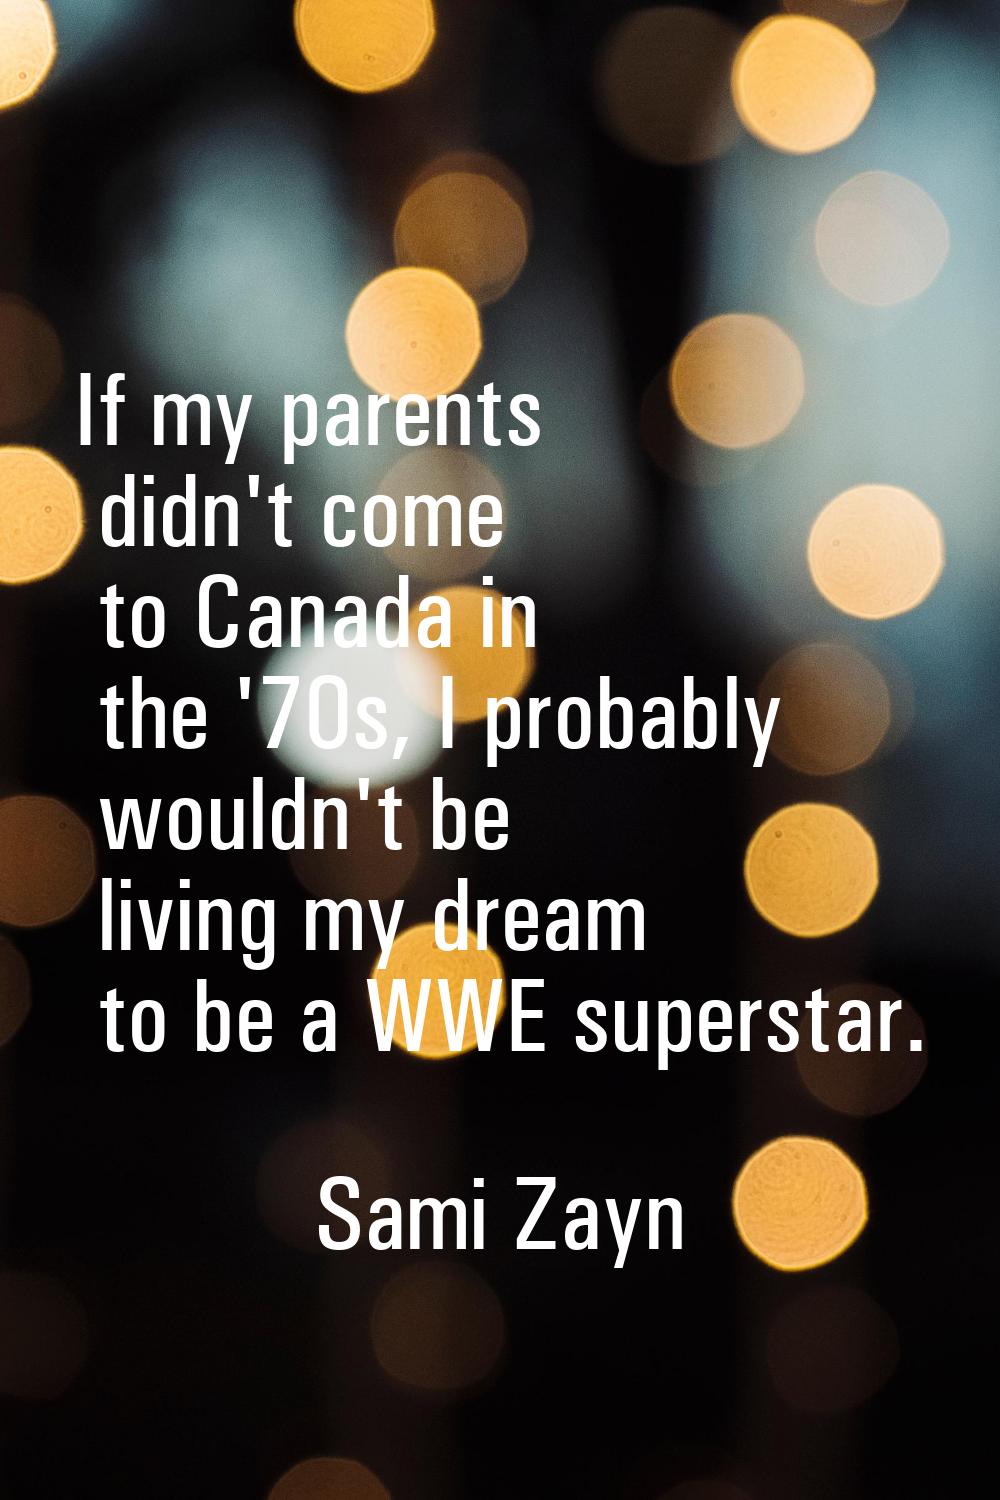 If my parents didn't come to Canada in the '70s, I probably wouldn't be living my dream to be a WWE